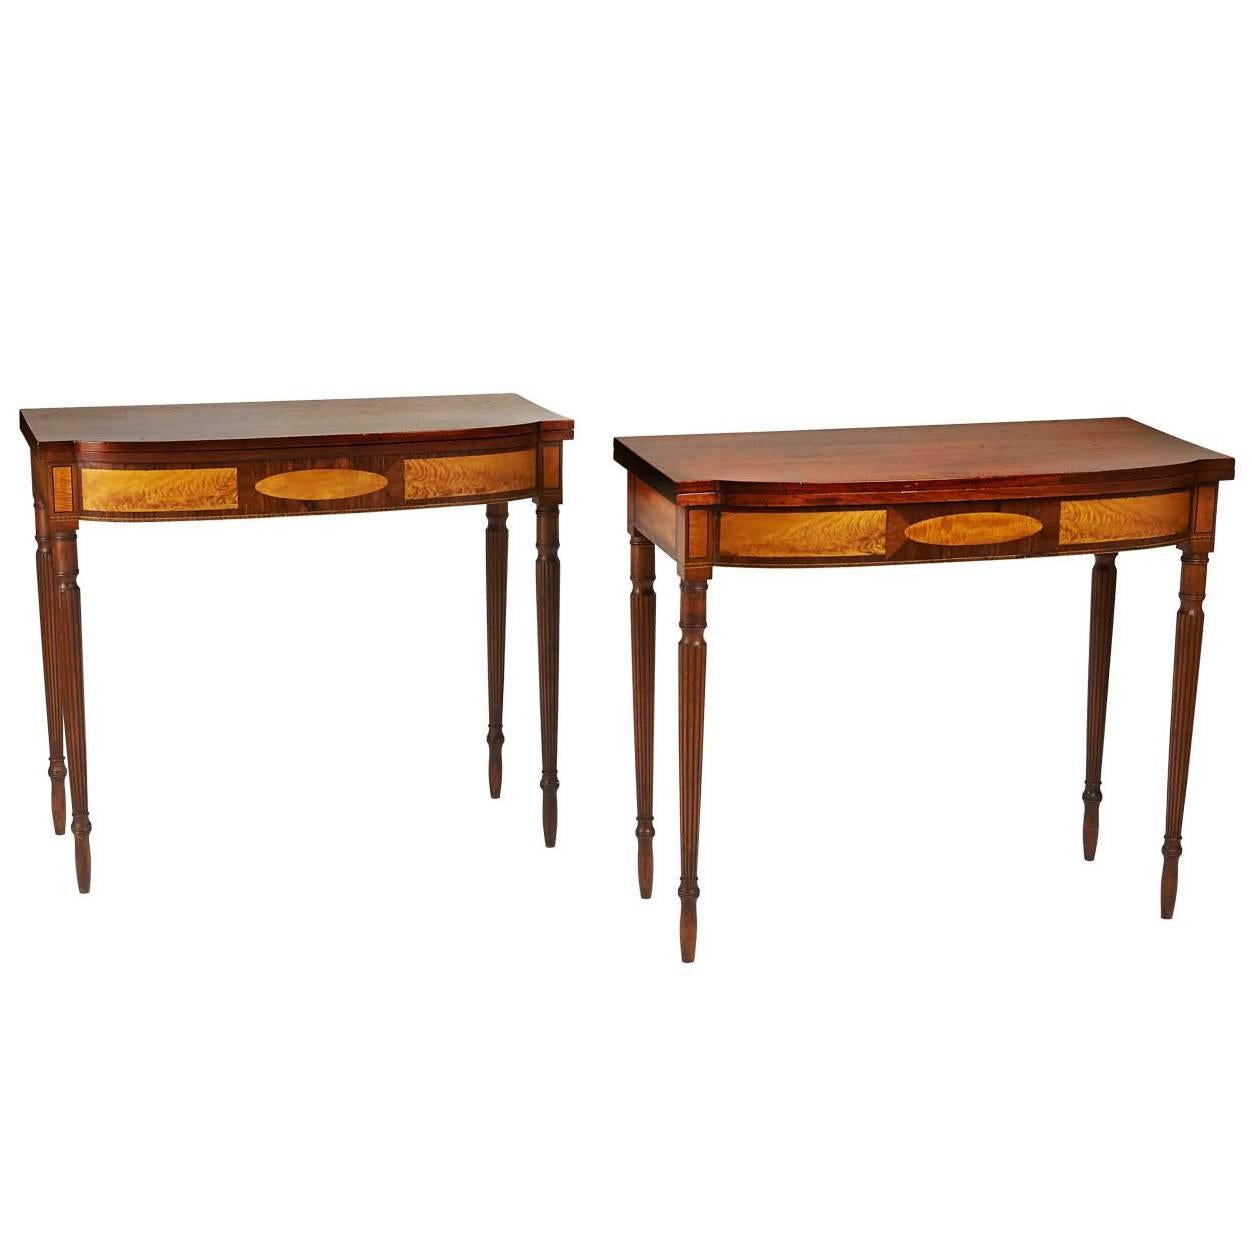 Rare Pair of Federal Inlaid Games Tables, New England circa 1810